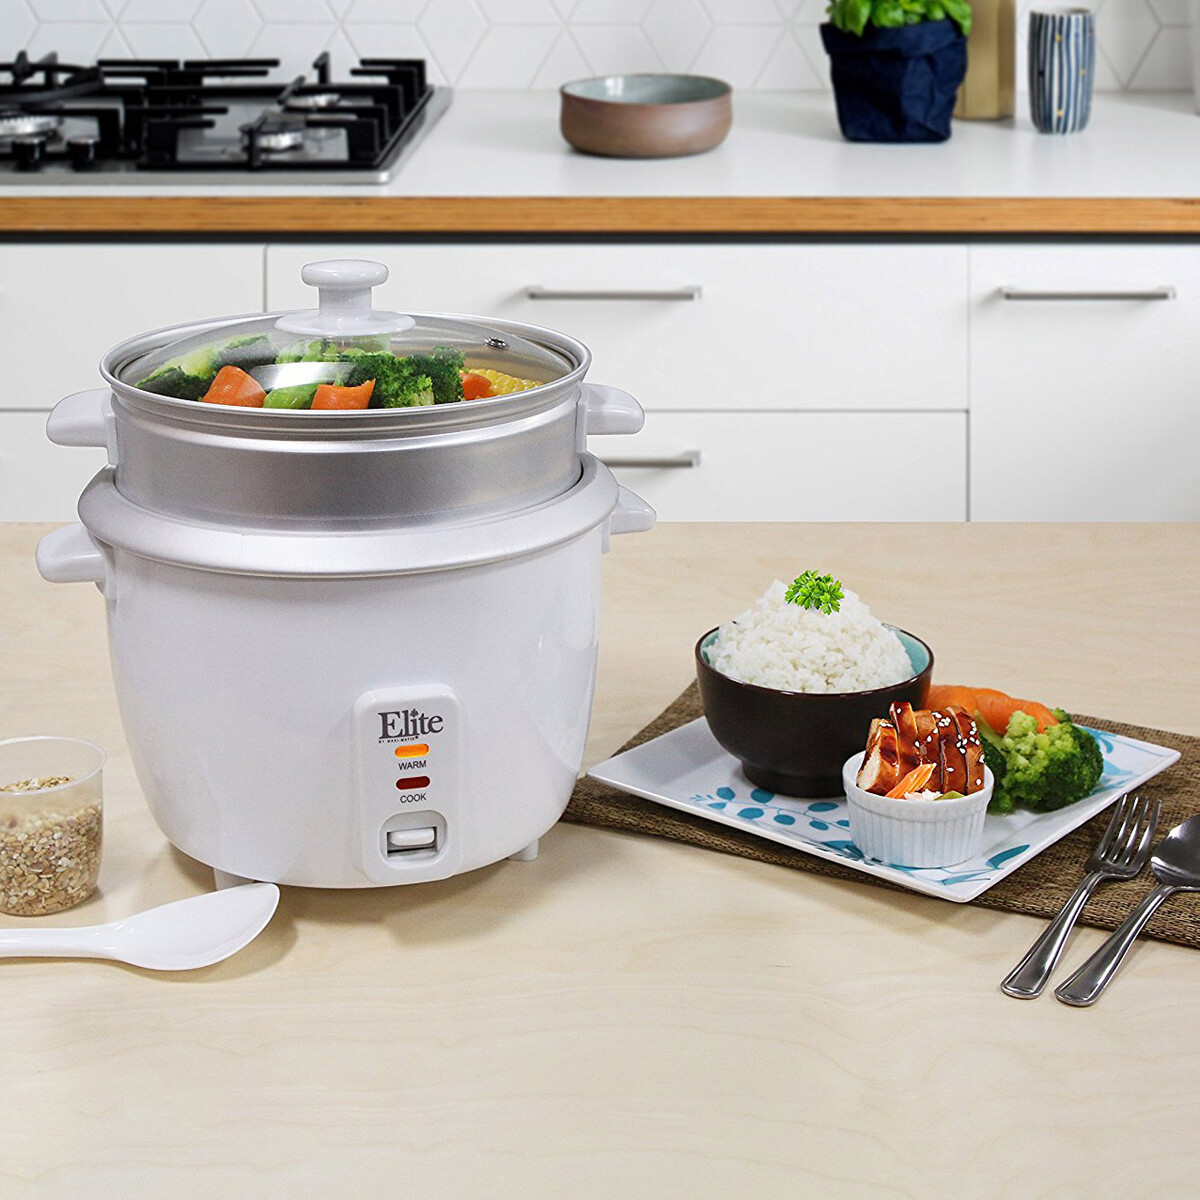 Elite Gourmet 6-Cup Nonstick Rice Cooker with Steam Tray